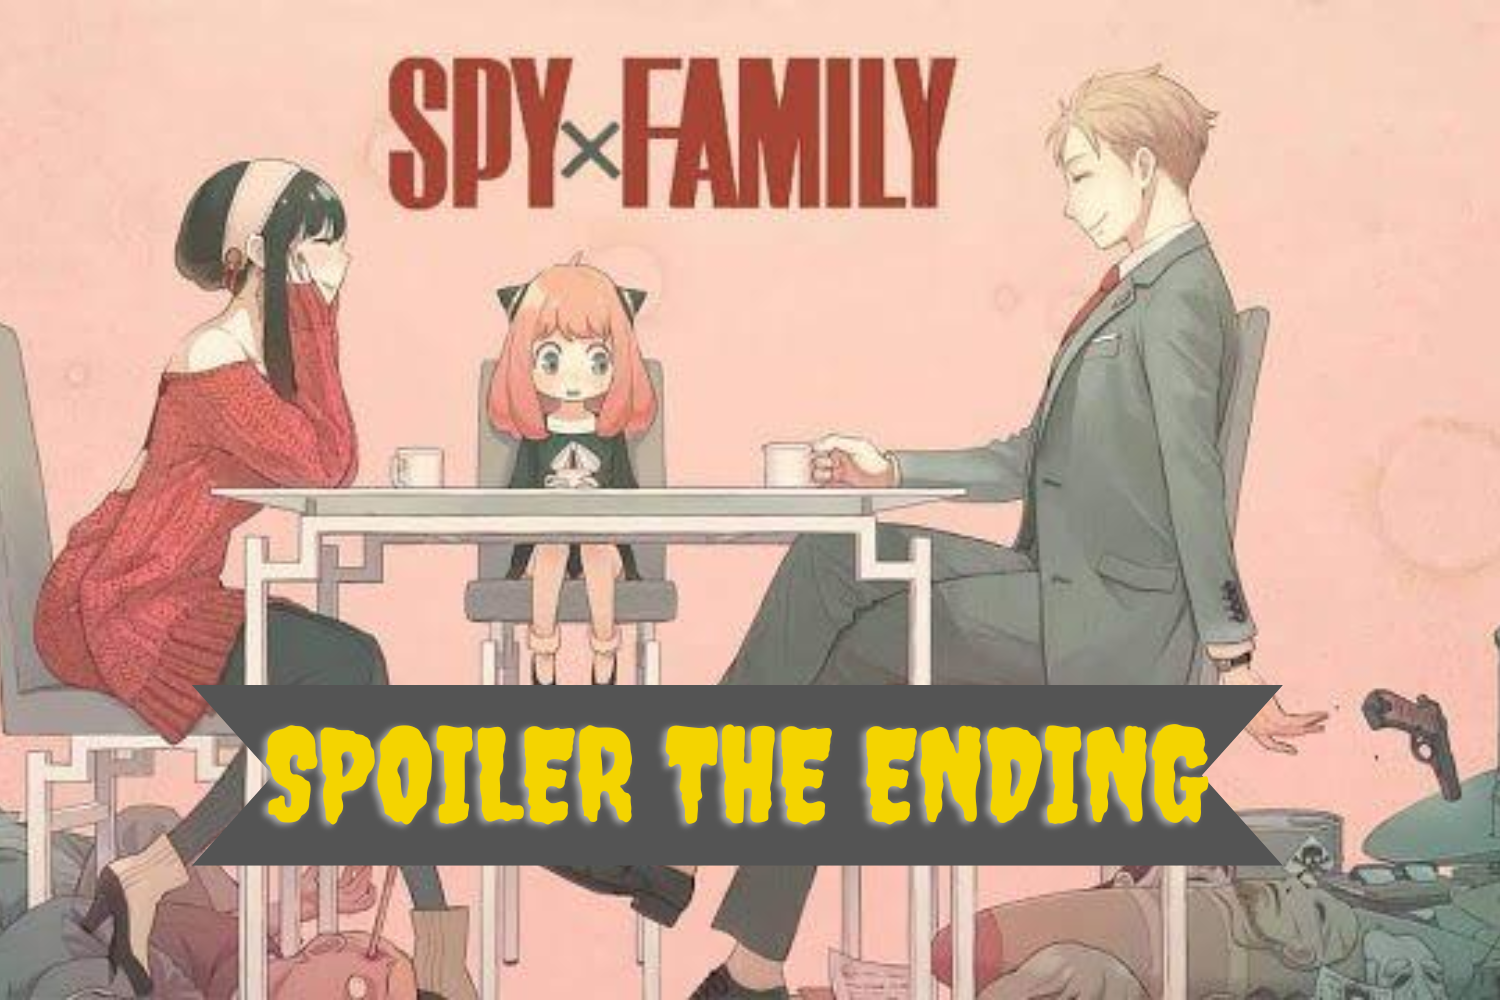 When will Spy x family end?